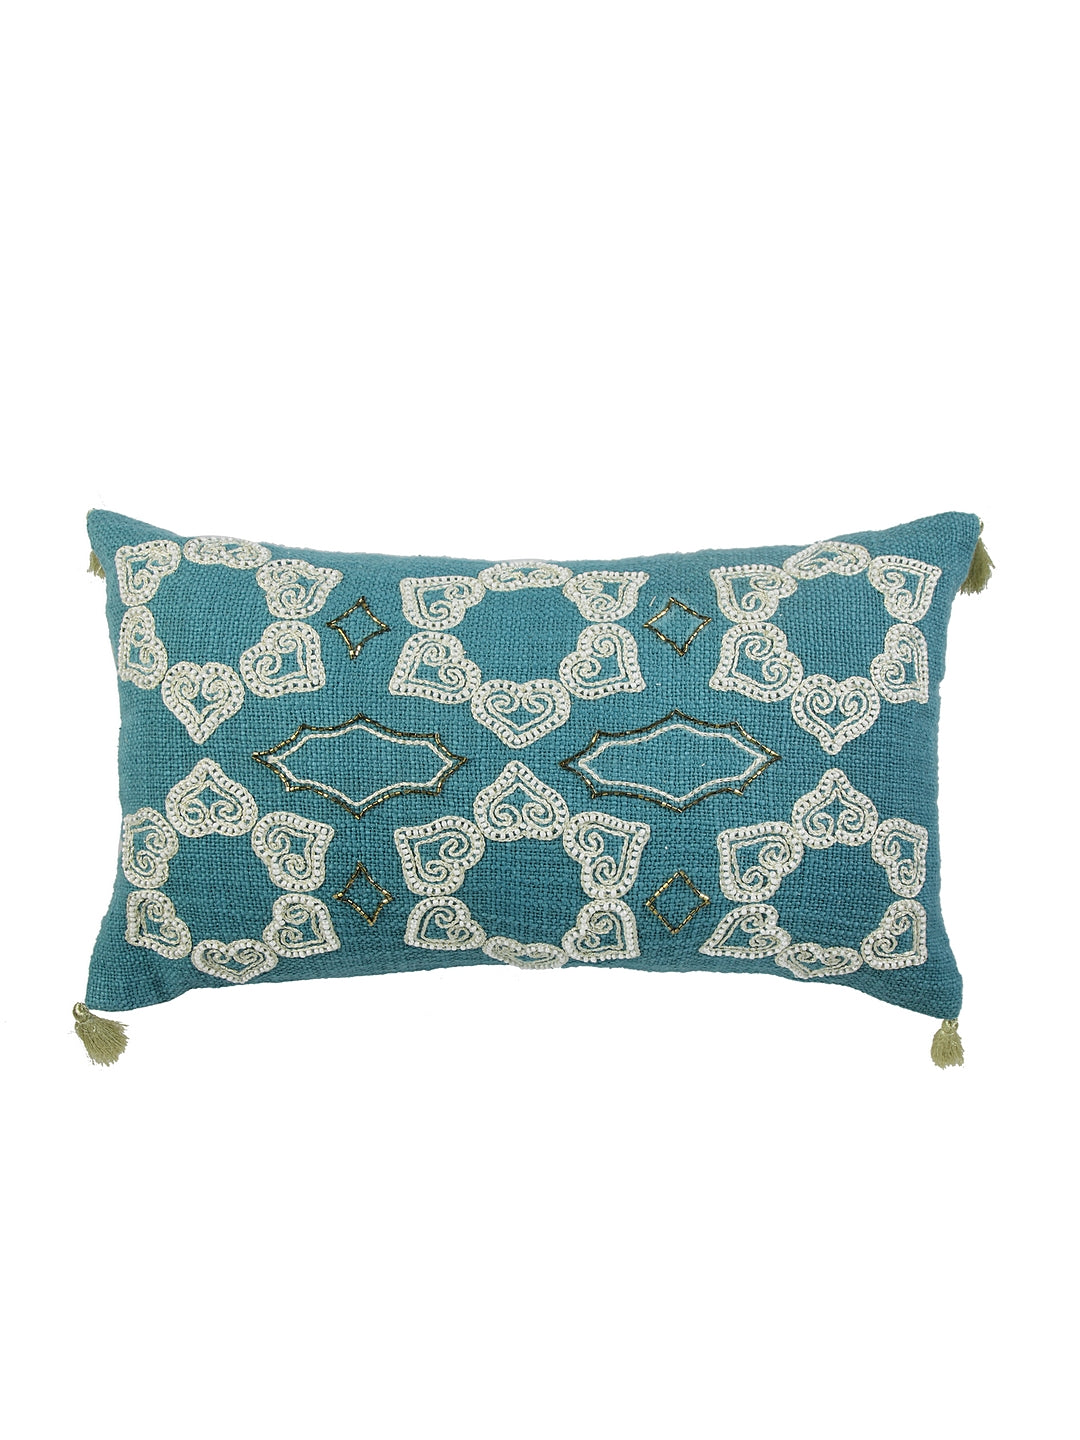 Blanc9 Royal Damask Cushion Cover with Filler 30x50cm